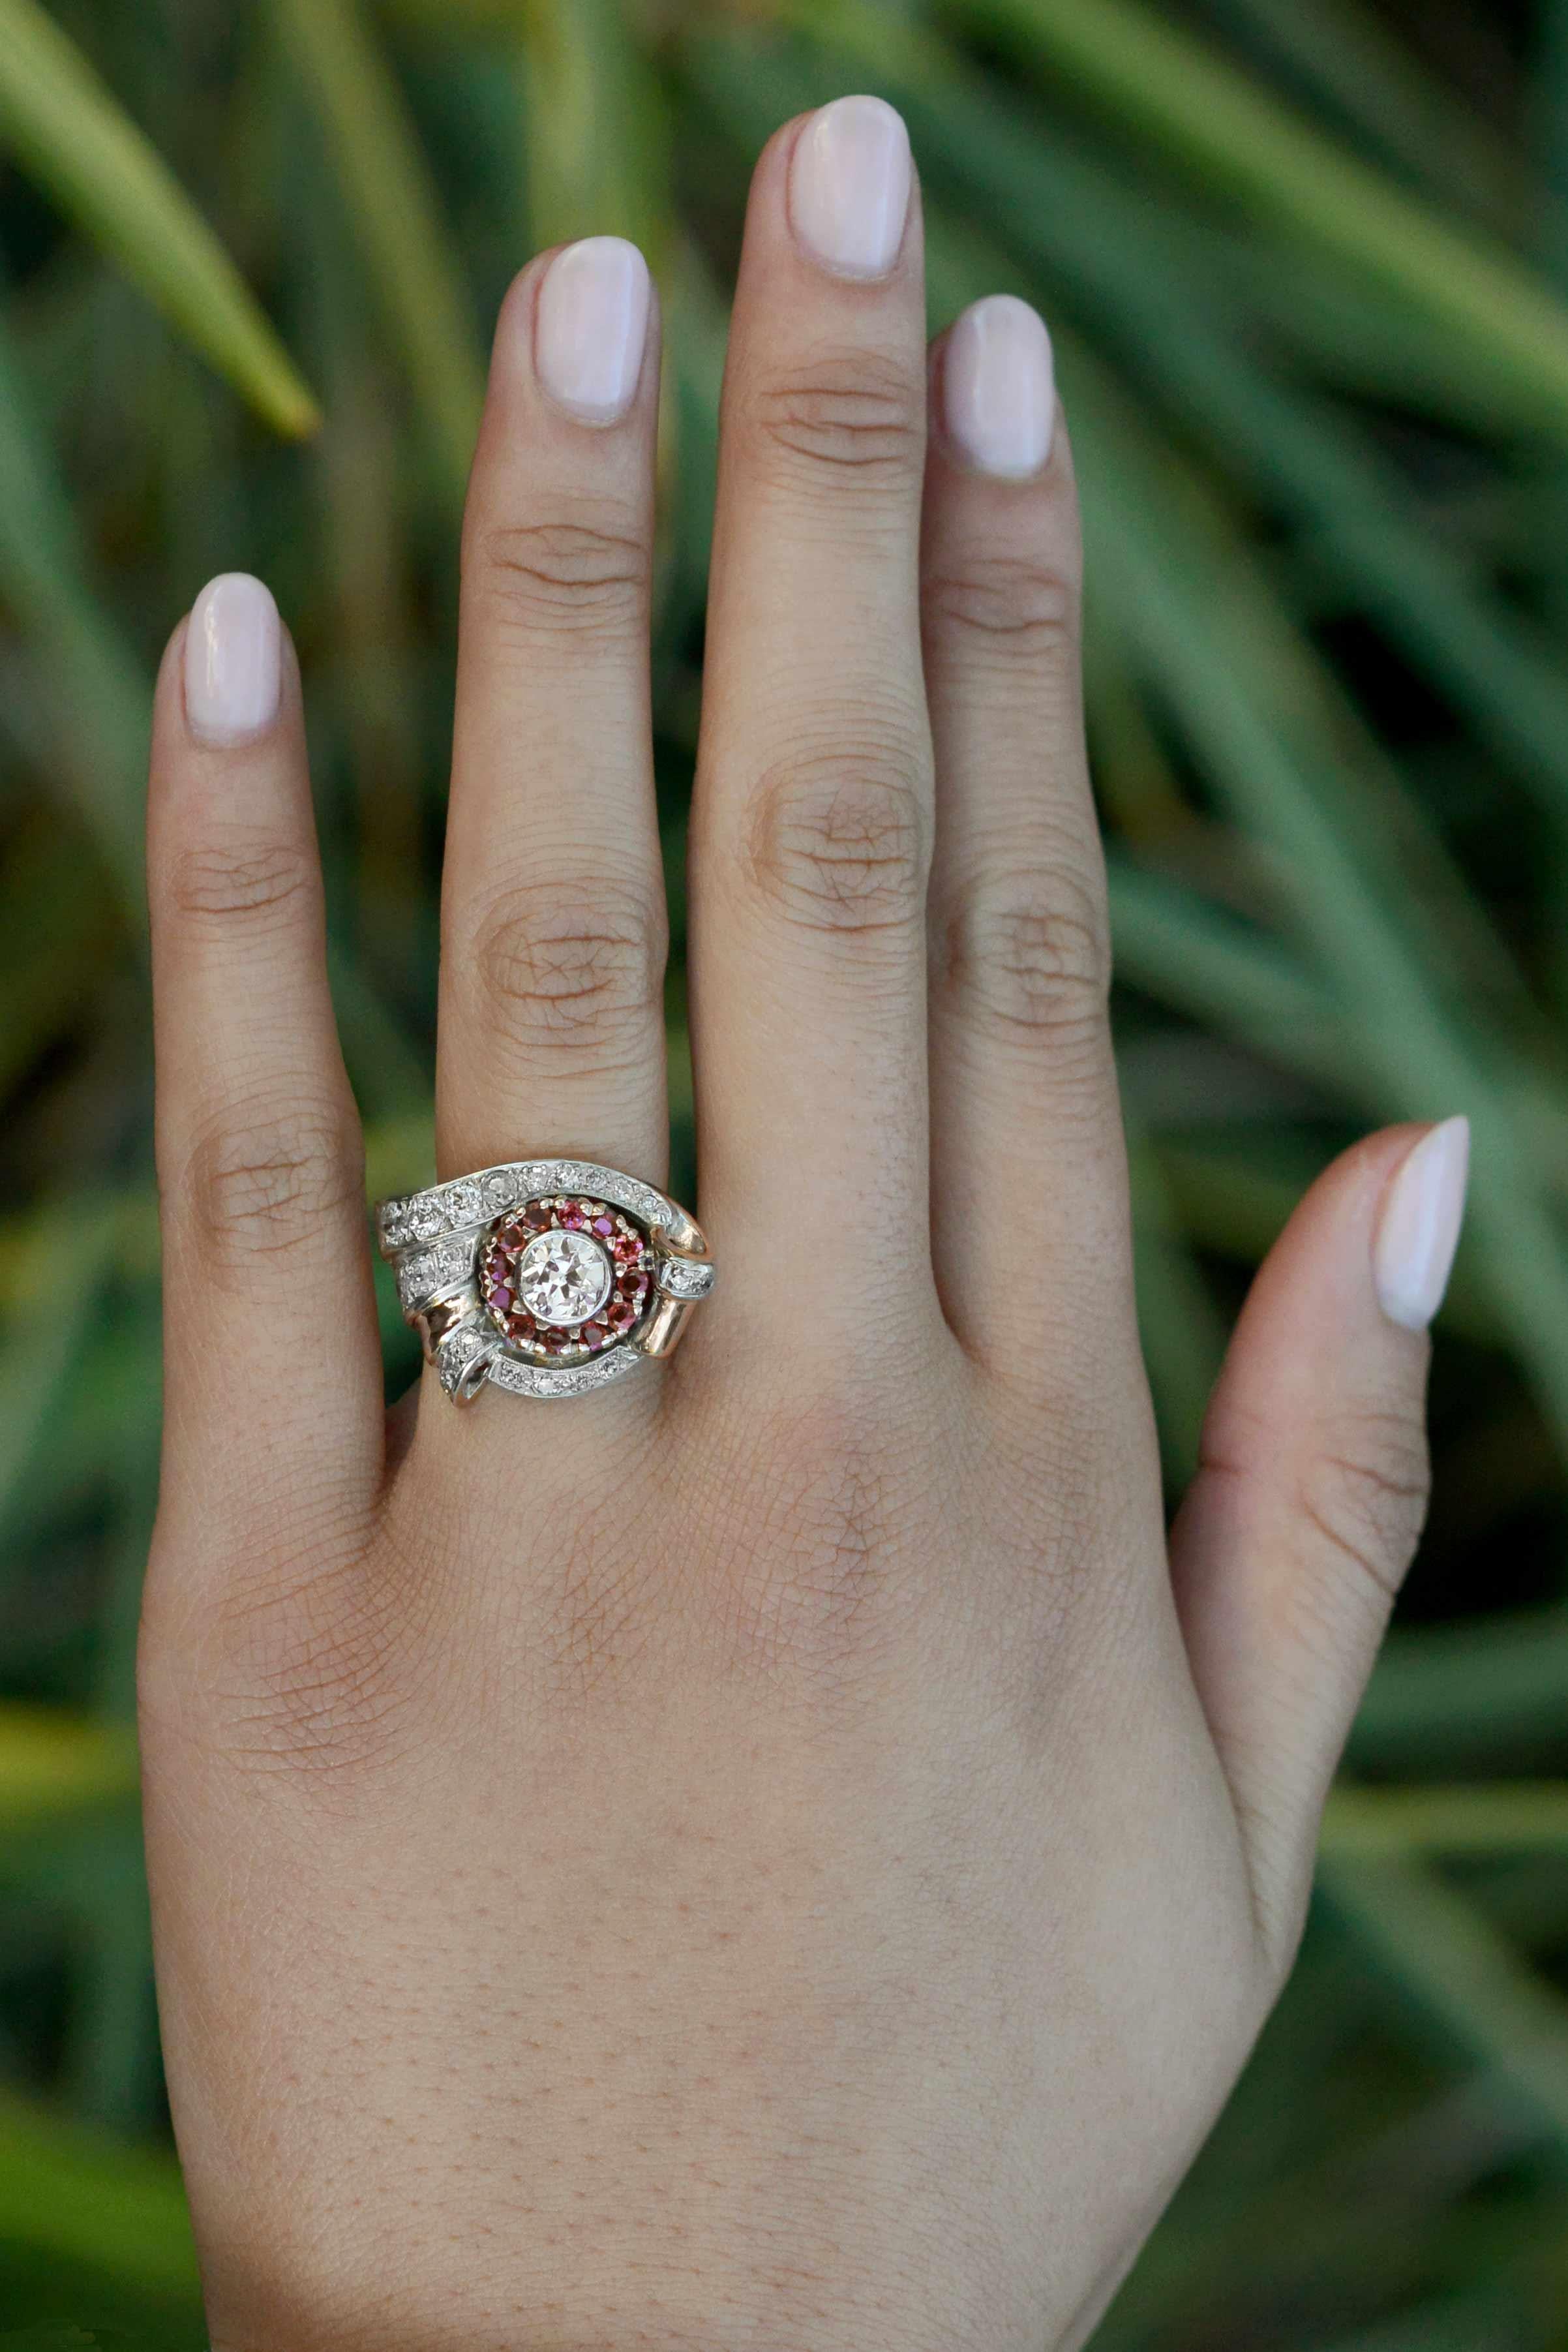 Make a Retro-lover's dream come true with this spectacular statement ring. Centered by a near carat, scintillatingly brilliant diamond nestled in a bezel setting. Bordering that is a glamorous halo of rubies accented by swirling, diamond-studded